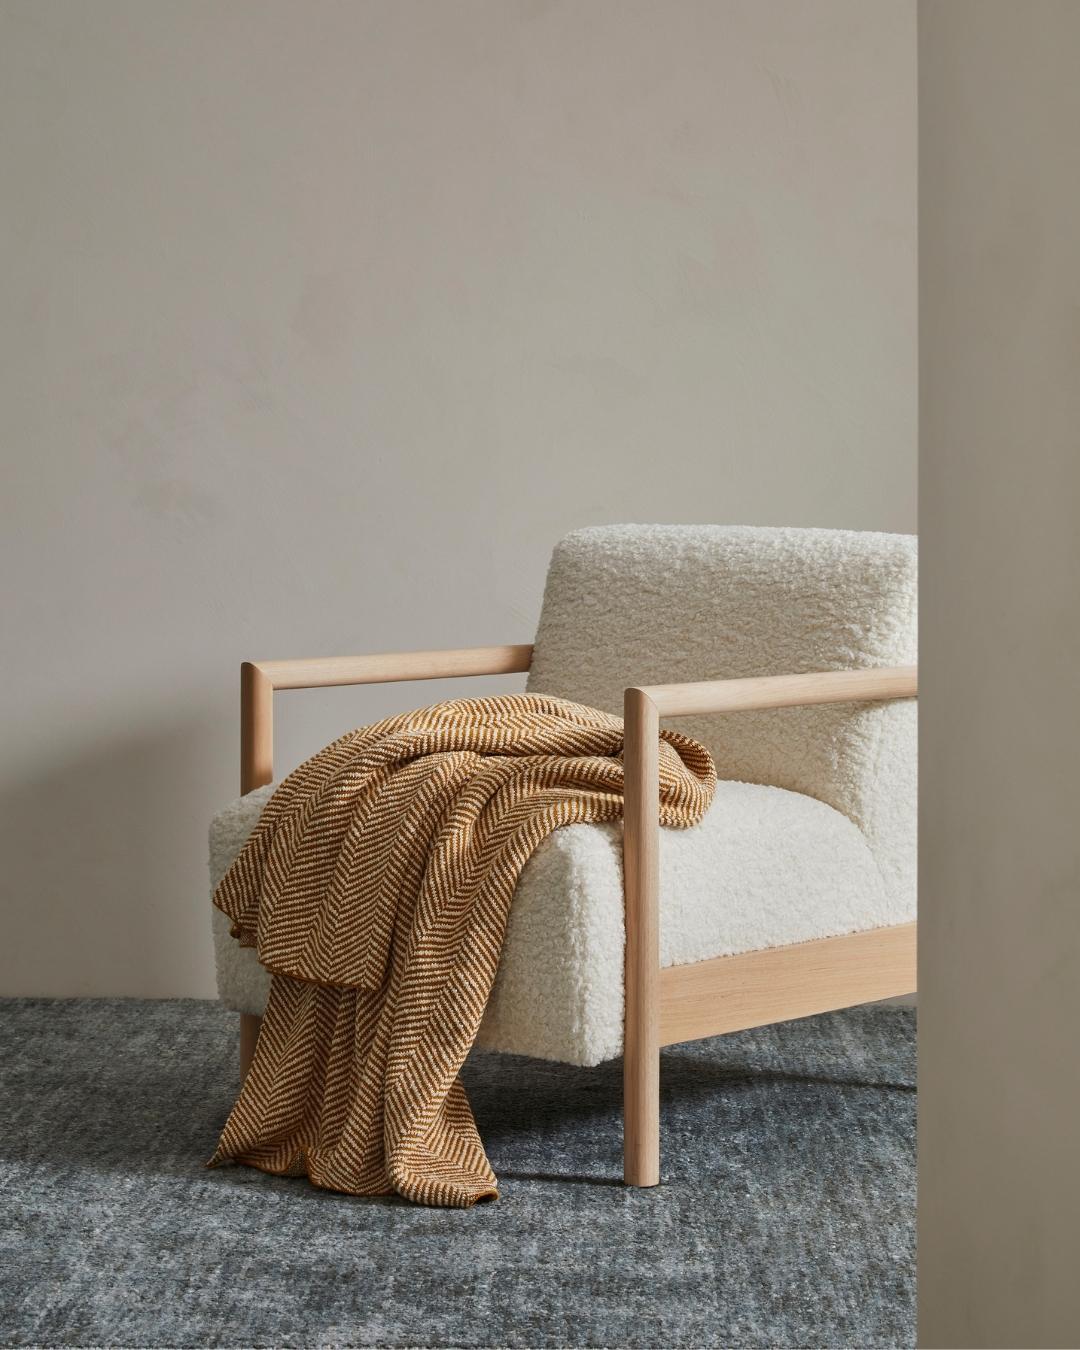 Our Solano throws style effortlessly, pairing beautifully with plain or contrasting pattern cushions, and draping with textural depth over sofas or bedding.